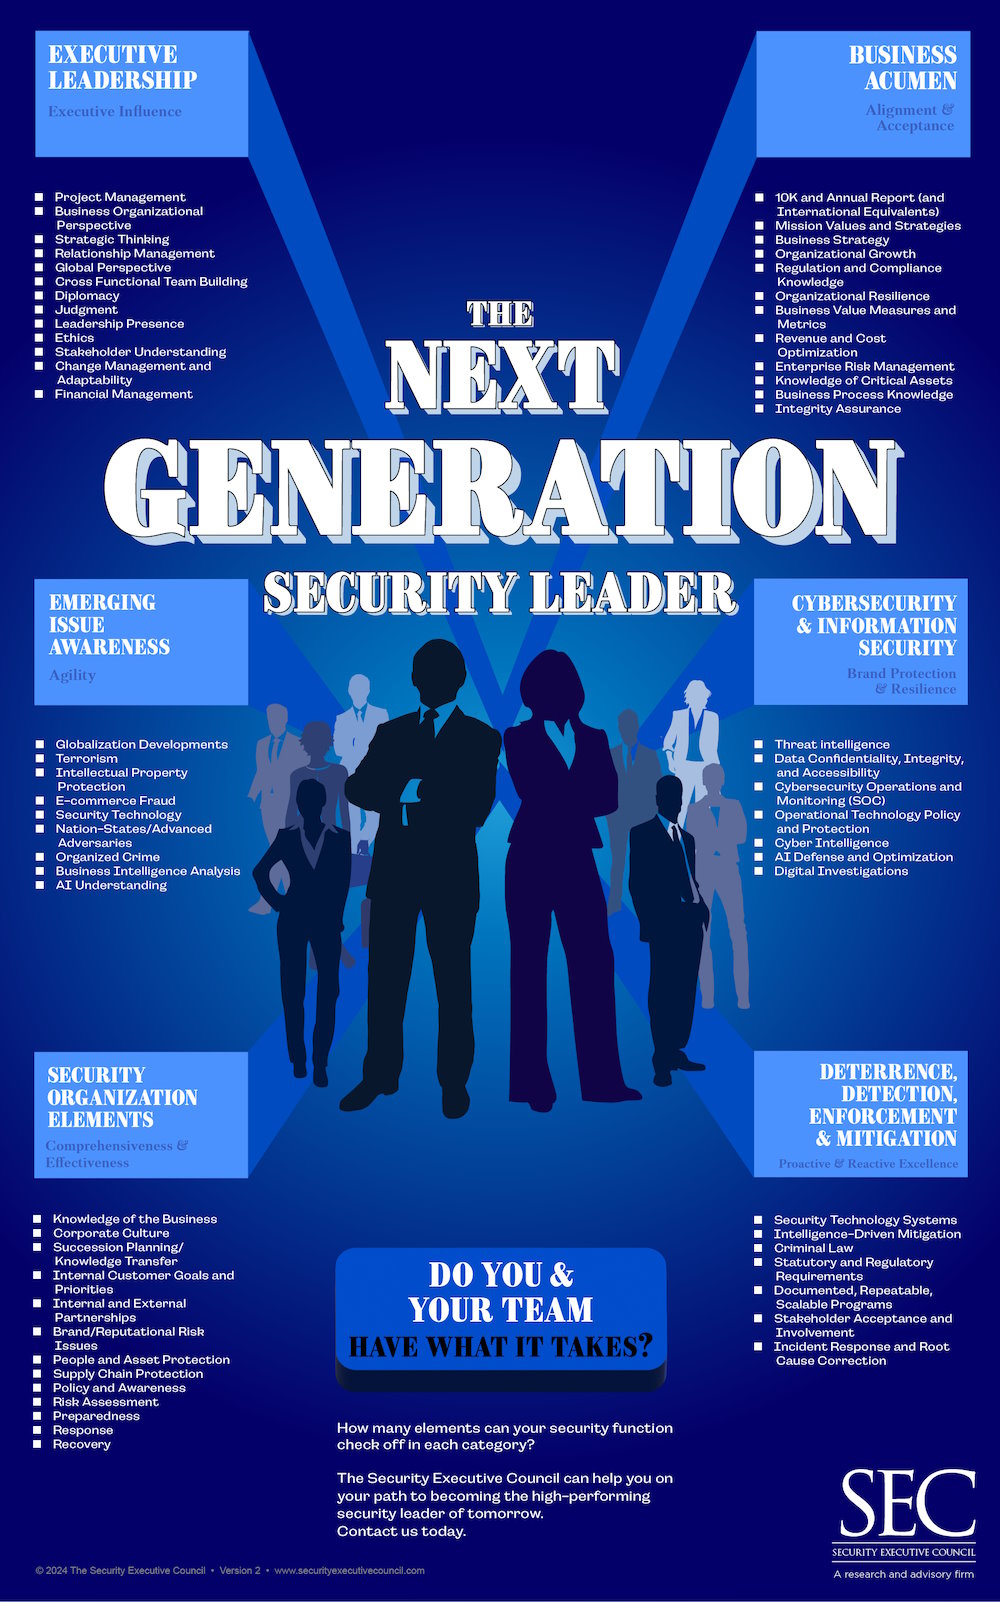 Infographic showing various competencies of a Security Leader